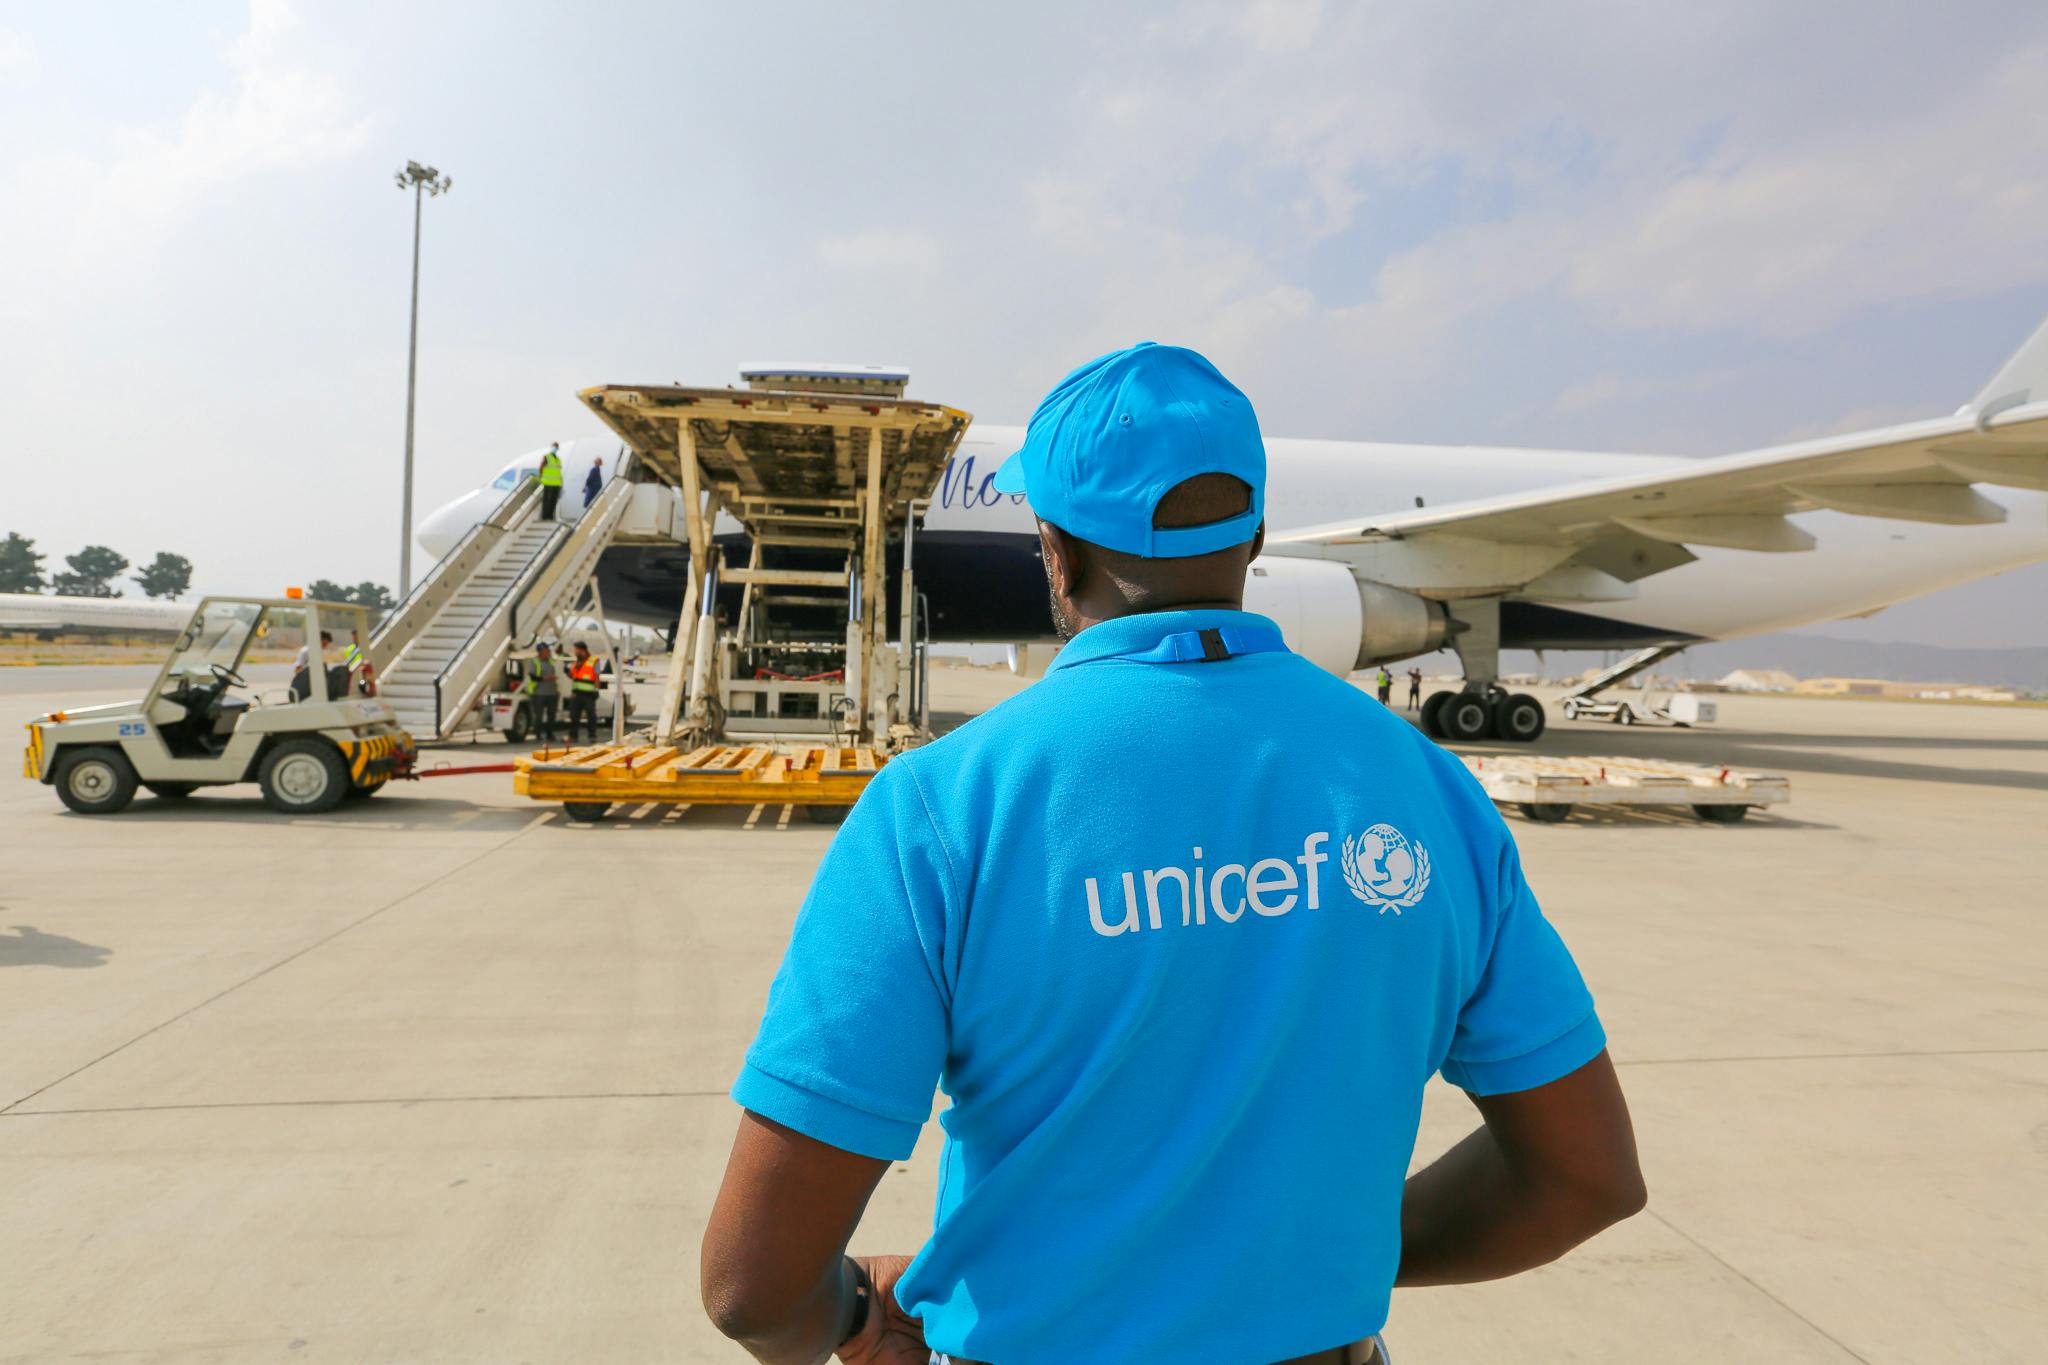 Global Parent- The second aircraft carrying UNICEF lifesaving medical supplies arrived today in Kabul through the European Civil Protection and Humanitarian Aid Operations (ECHO) Airbridge.